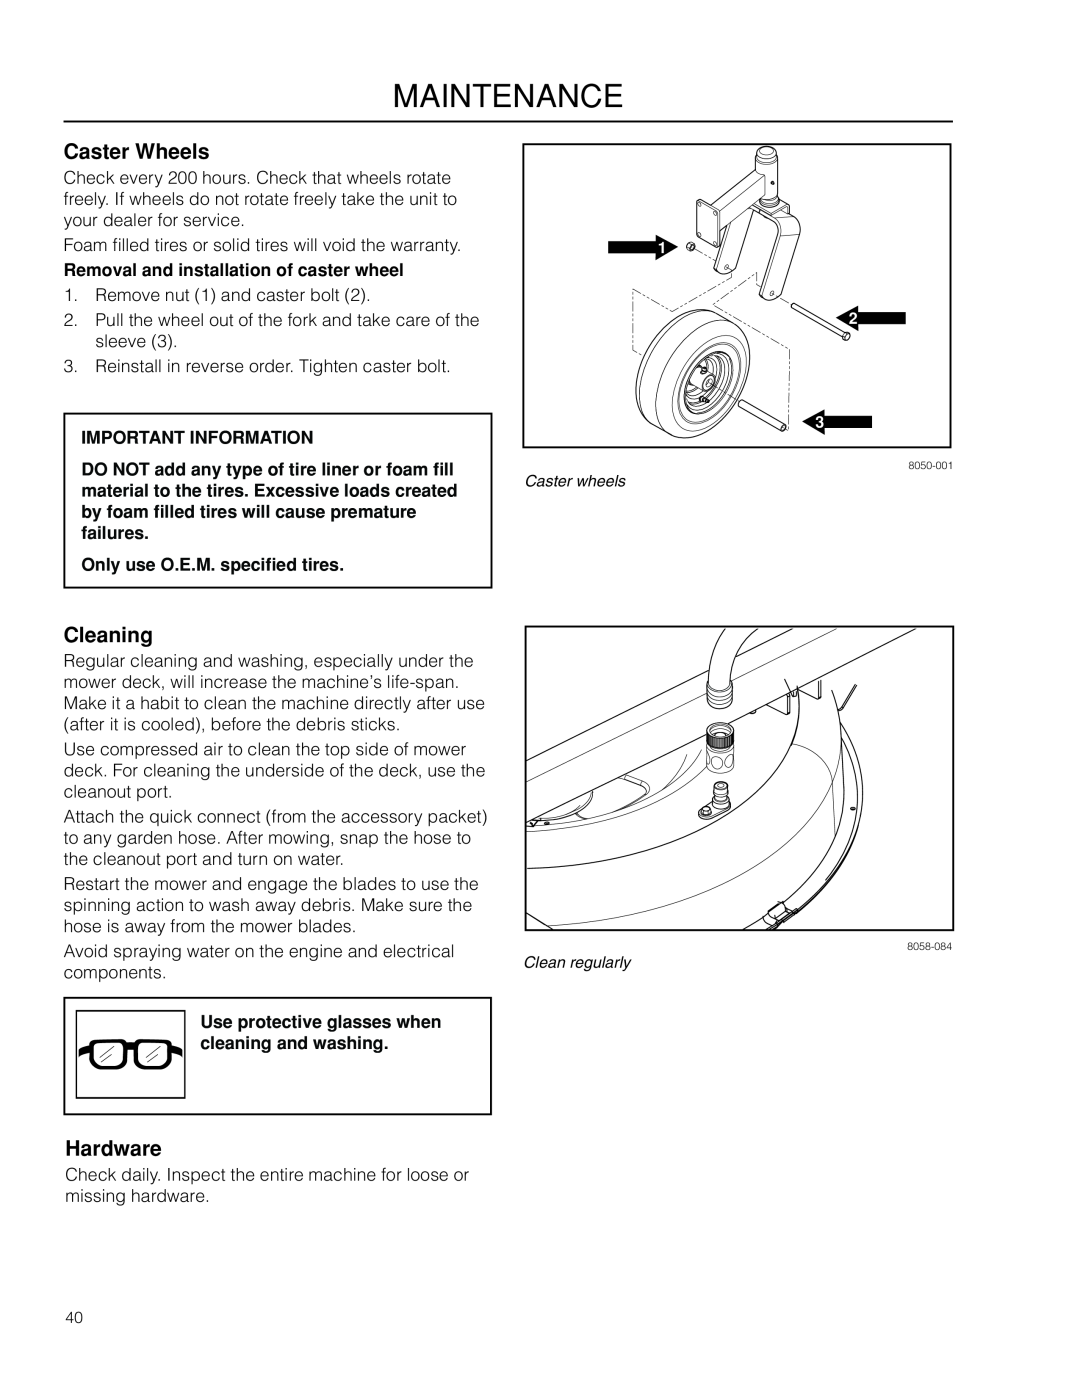 Husqvarna RZ4219BF / 966582201 Caster Wheels, Cleaning, Hardware, Removal and installation of caster wheel, Maintenance 